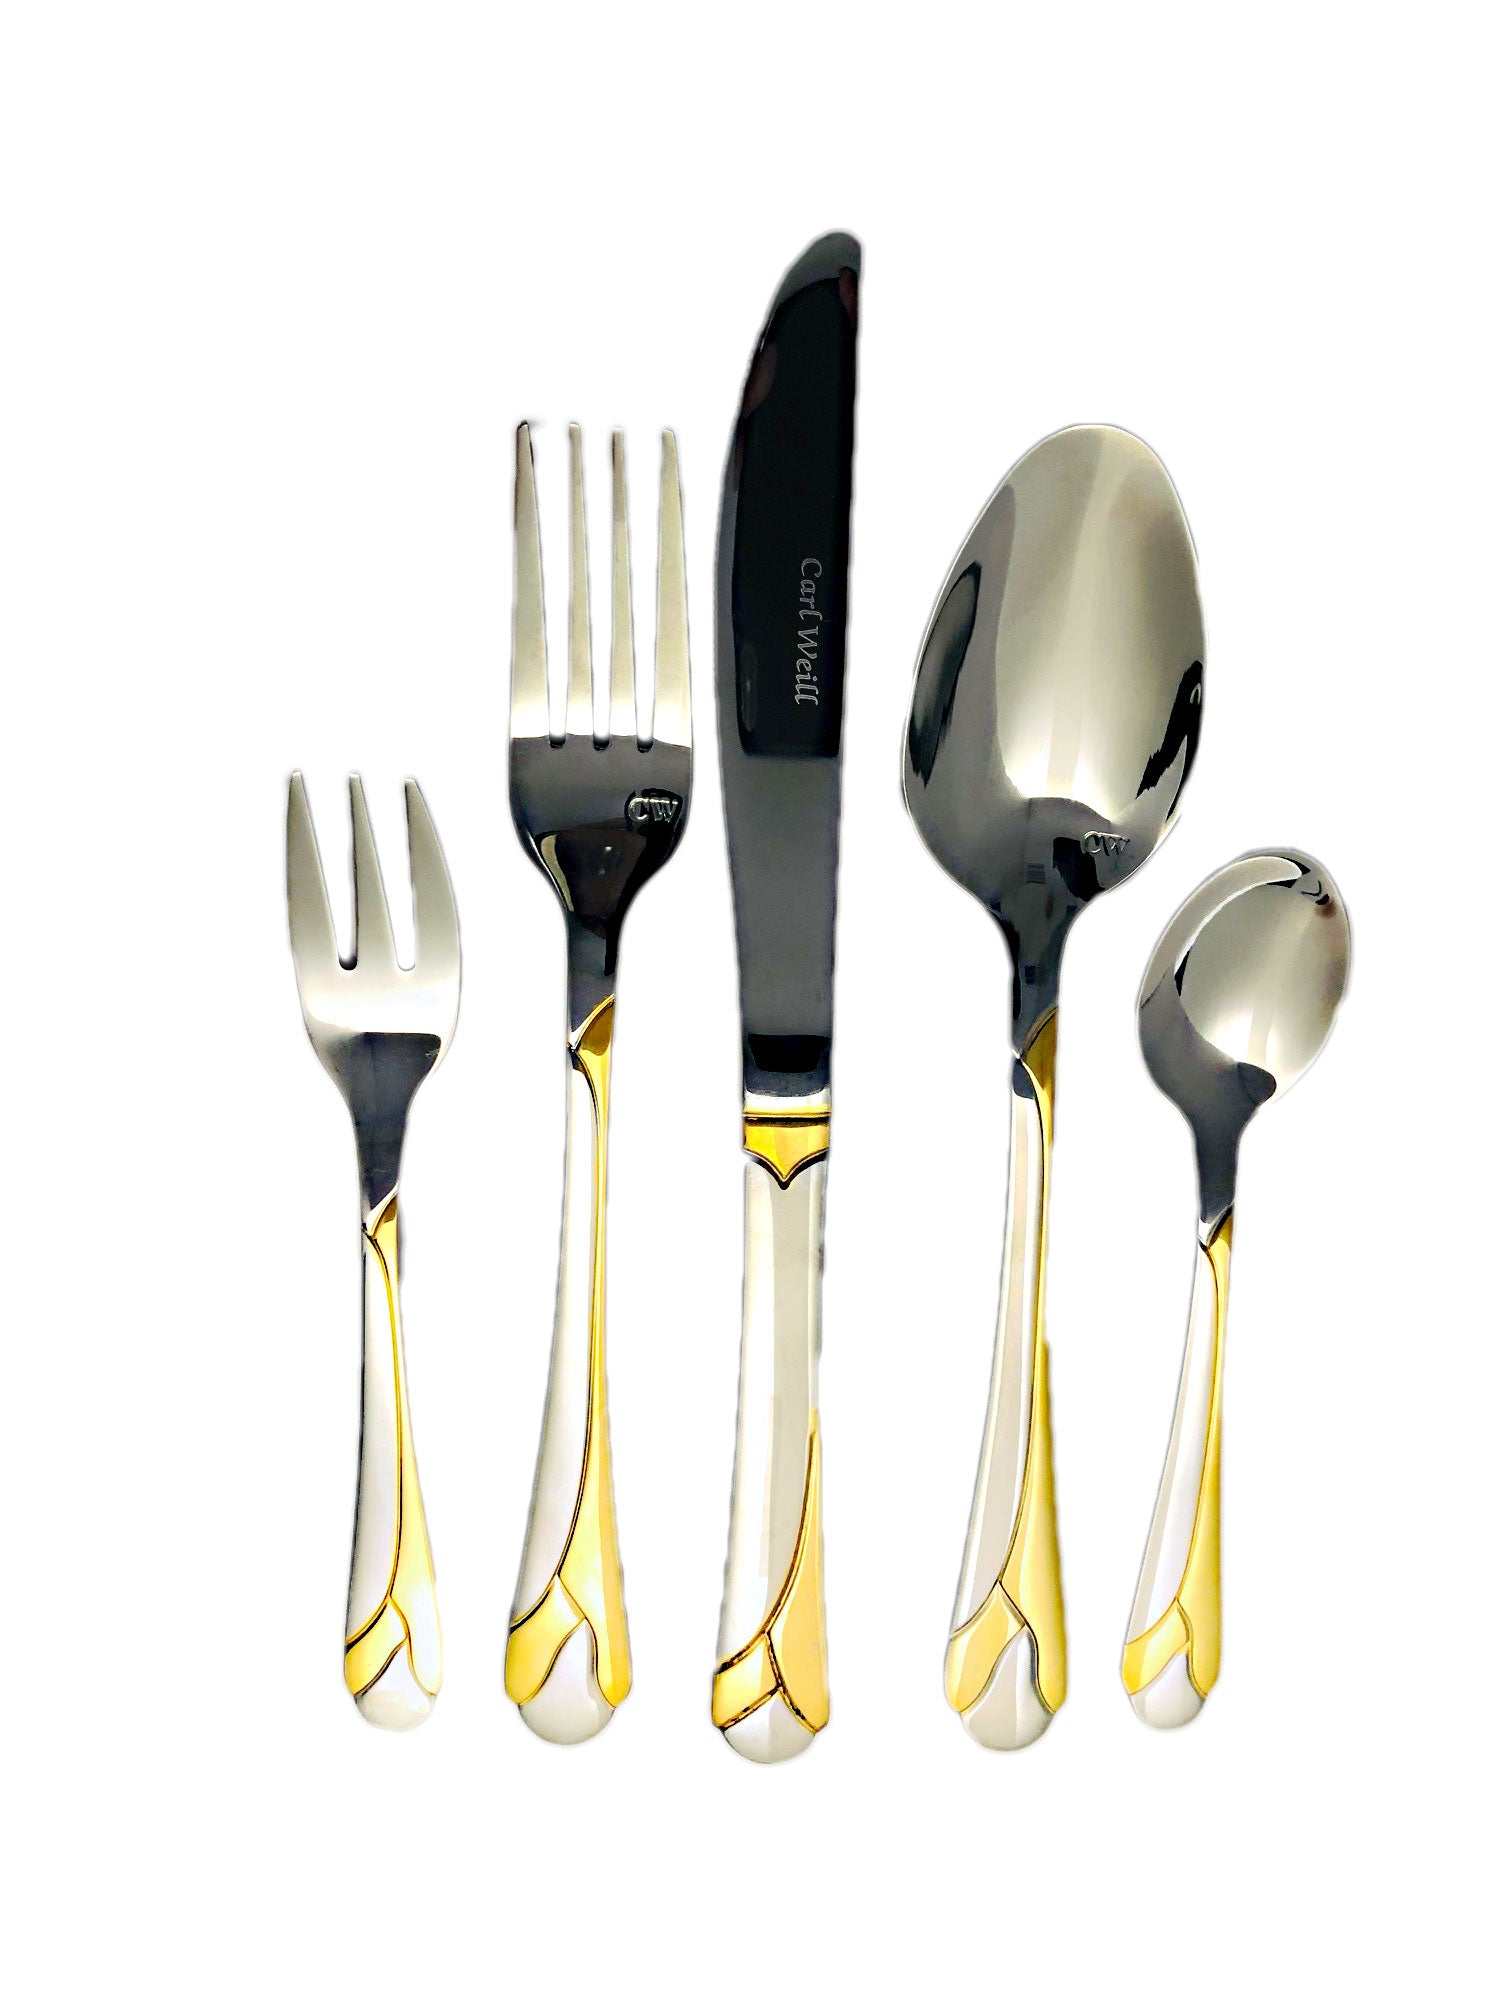 Flatware 78 piece Set Tulip gold by Carl Weill 18/10 Stainless Steel Service for 12 + 12 Serving Pieces - Royal Gift